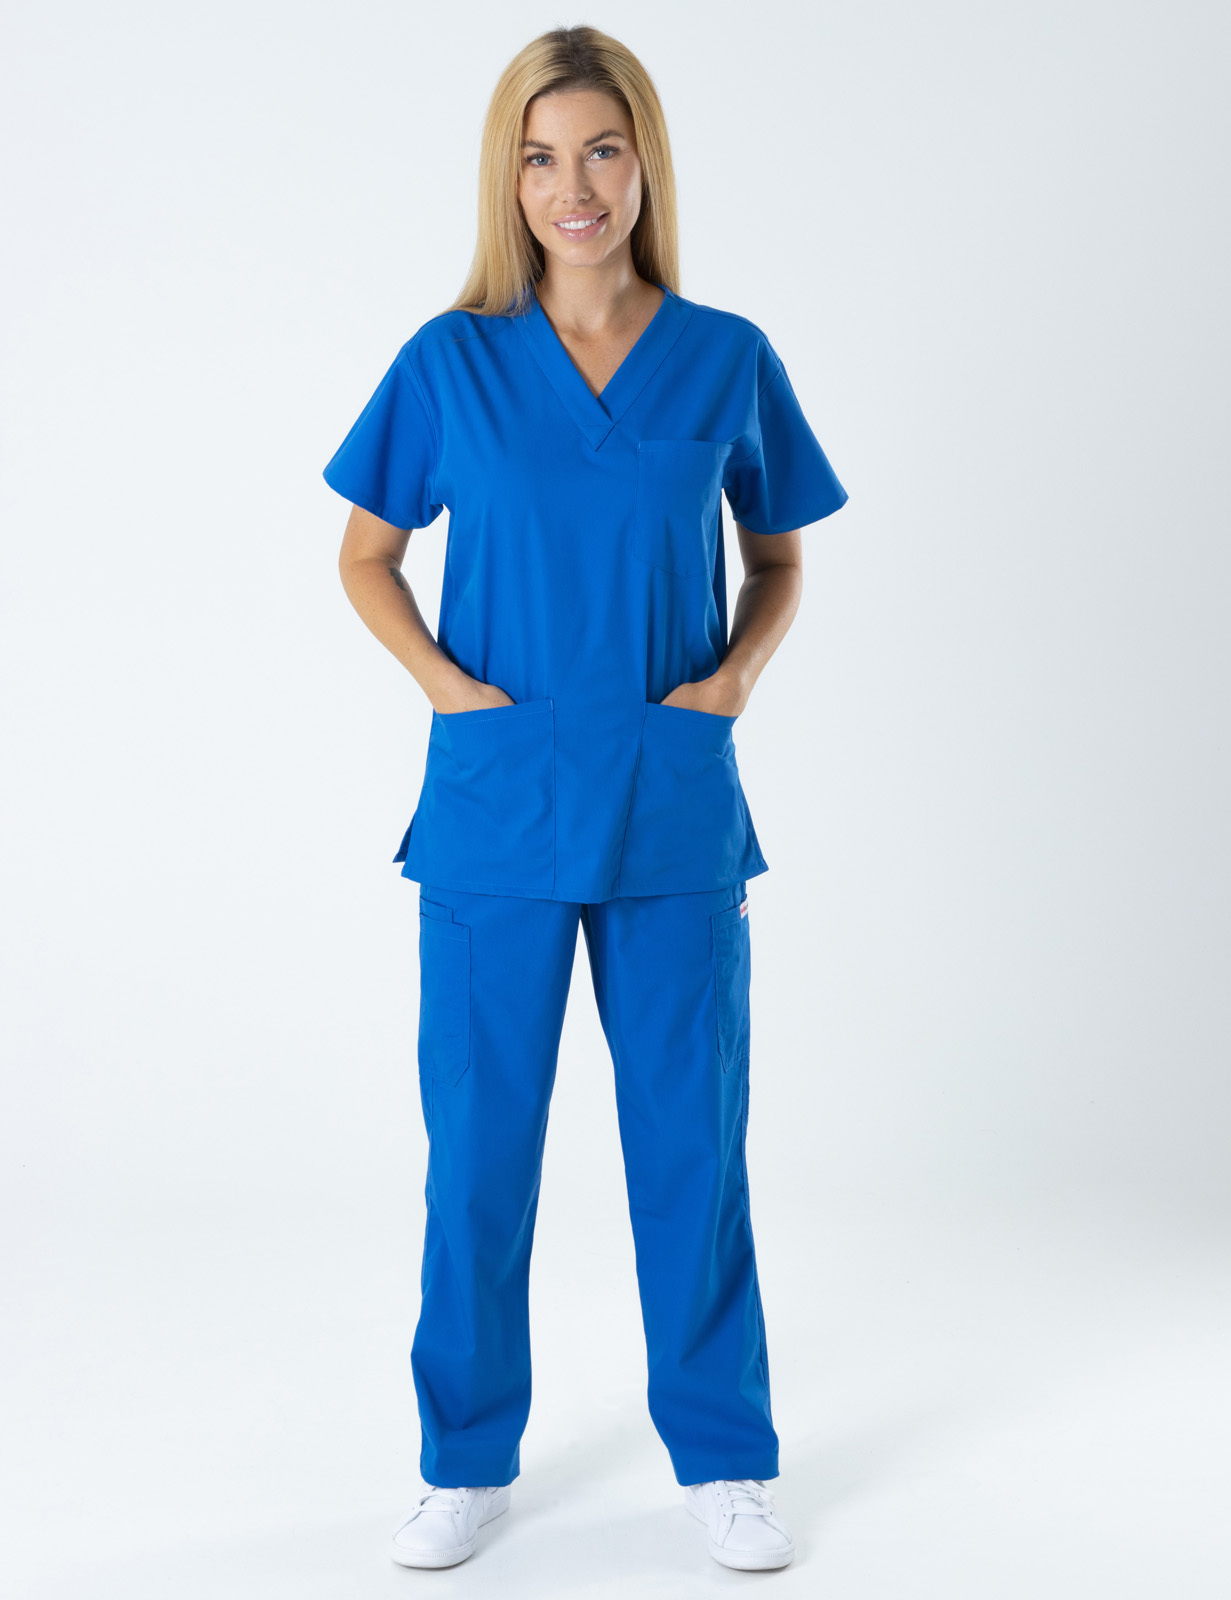 Canberra Hospital - Cardiology Cardiac Sonographer (4 Pocket Scrub Top and Cargo Pants in Royal incl Logos)